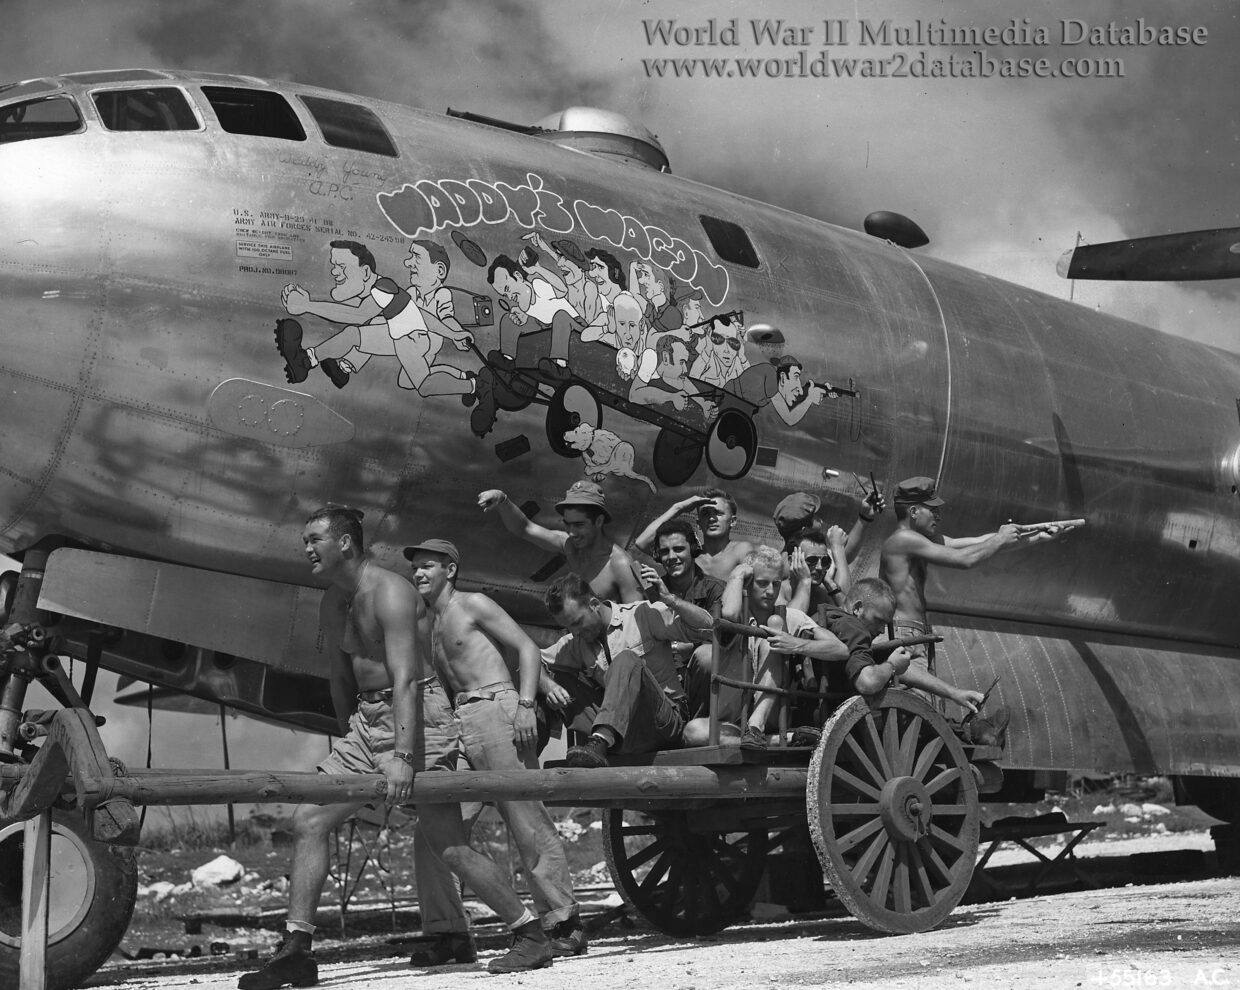 The crew of B-29 Superfortress 42-24598 “Waddy‘s Wagon“